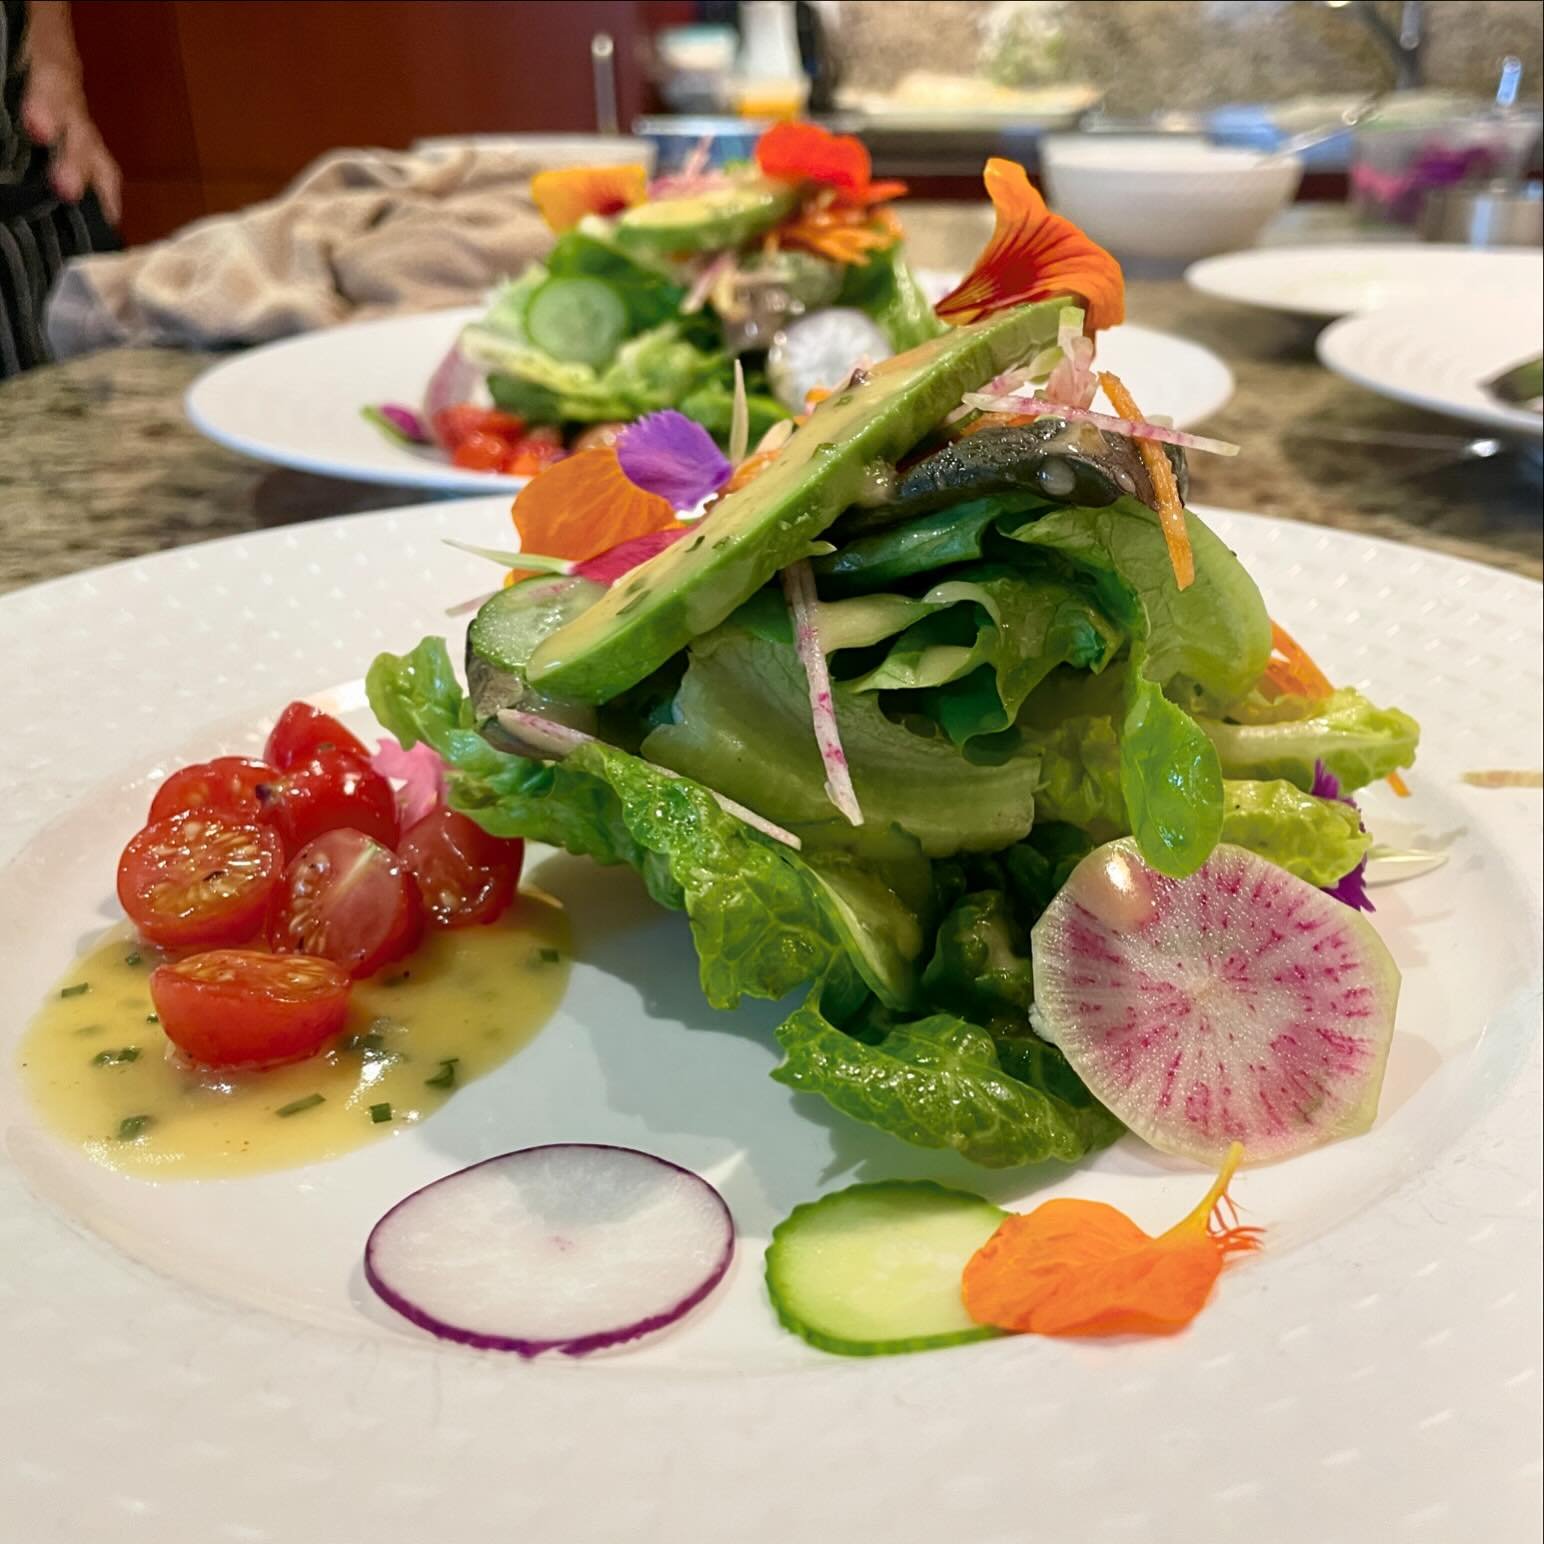 Healthy Salads make me feel better every time.
#eatinghealthy #healthyeating #healthyfood #health #salad #cleaneating  #foodforthought #mauiprivatechefmatt #alohapartychefmatt